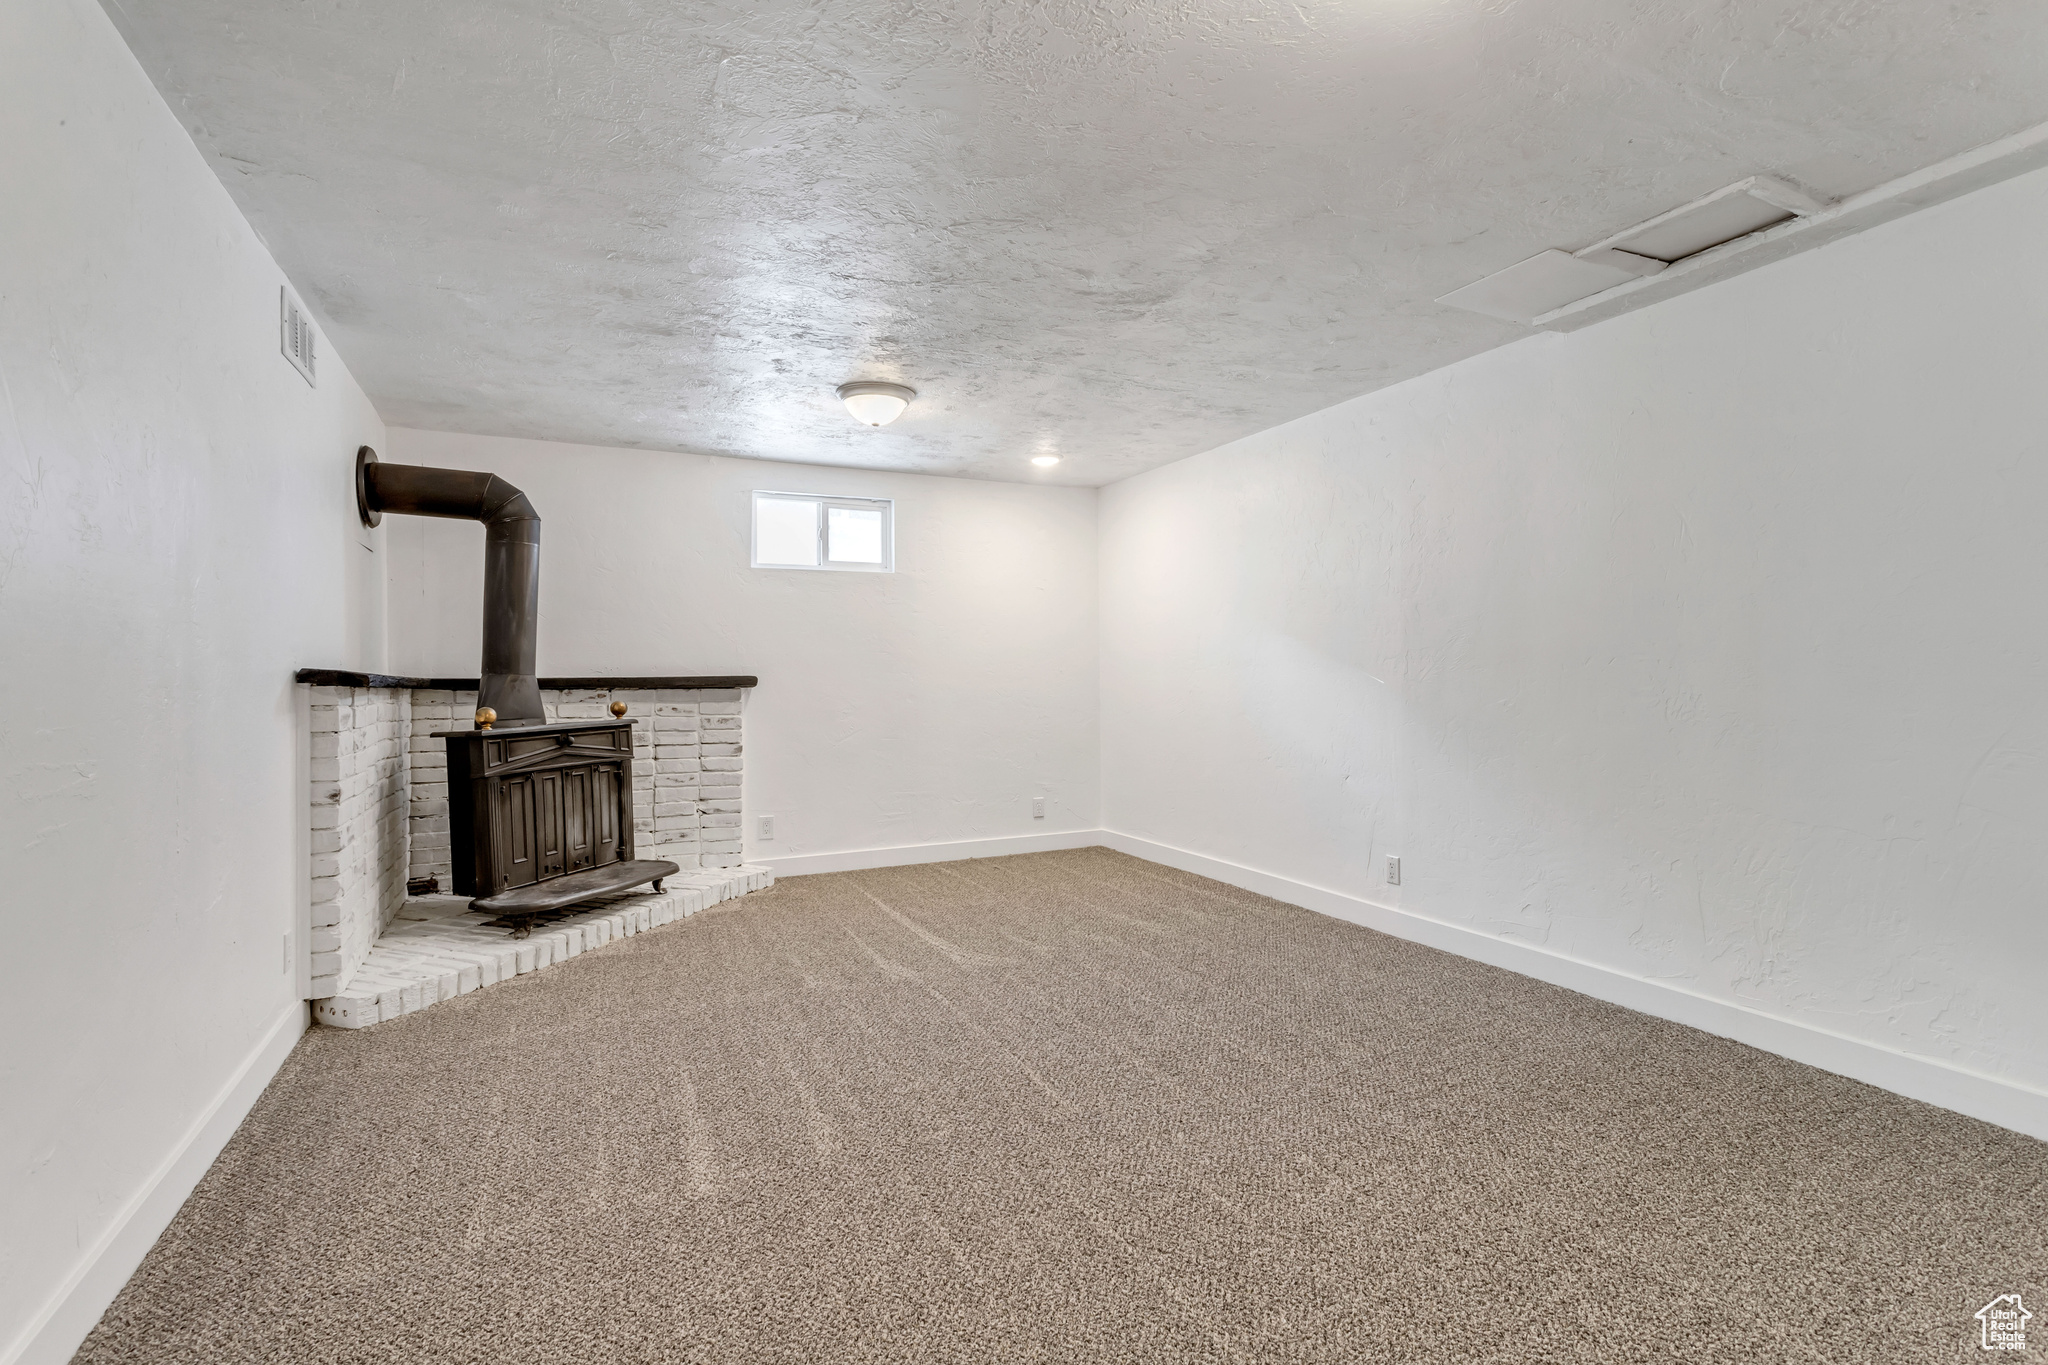 Unfurnished living room with a wood stove, carpet floors, and a textured ceiling